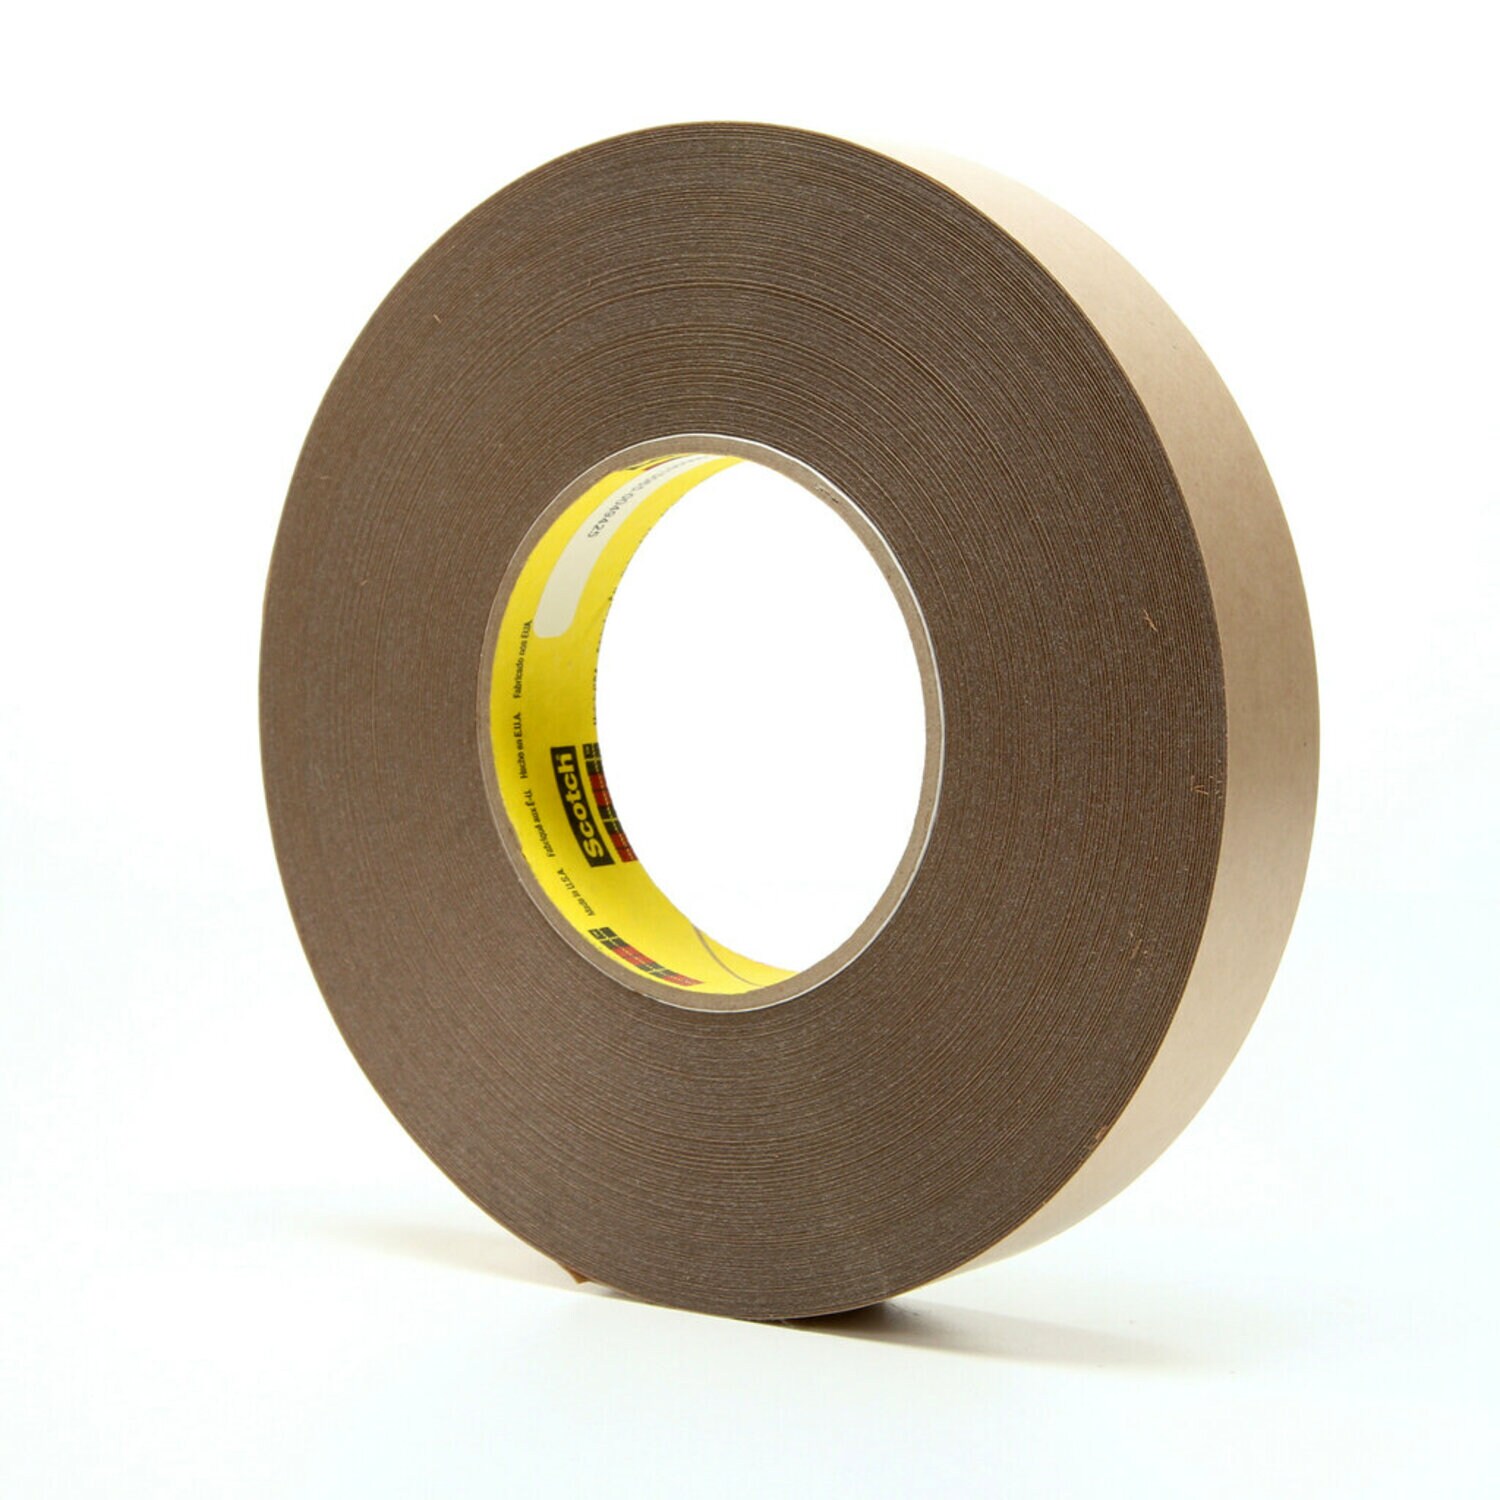 7010311945 - 3M Removable Repositionable Tape 9425, Clear, 3 in x 72 yd, 5.8 mil, 3
rolls per case